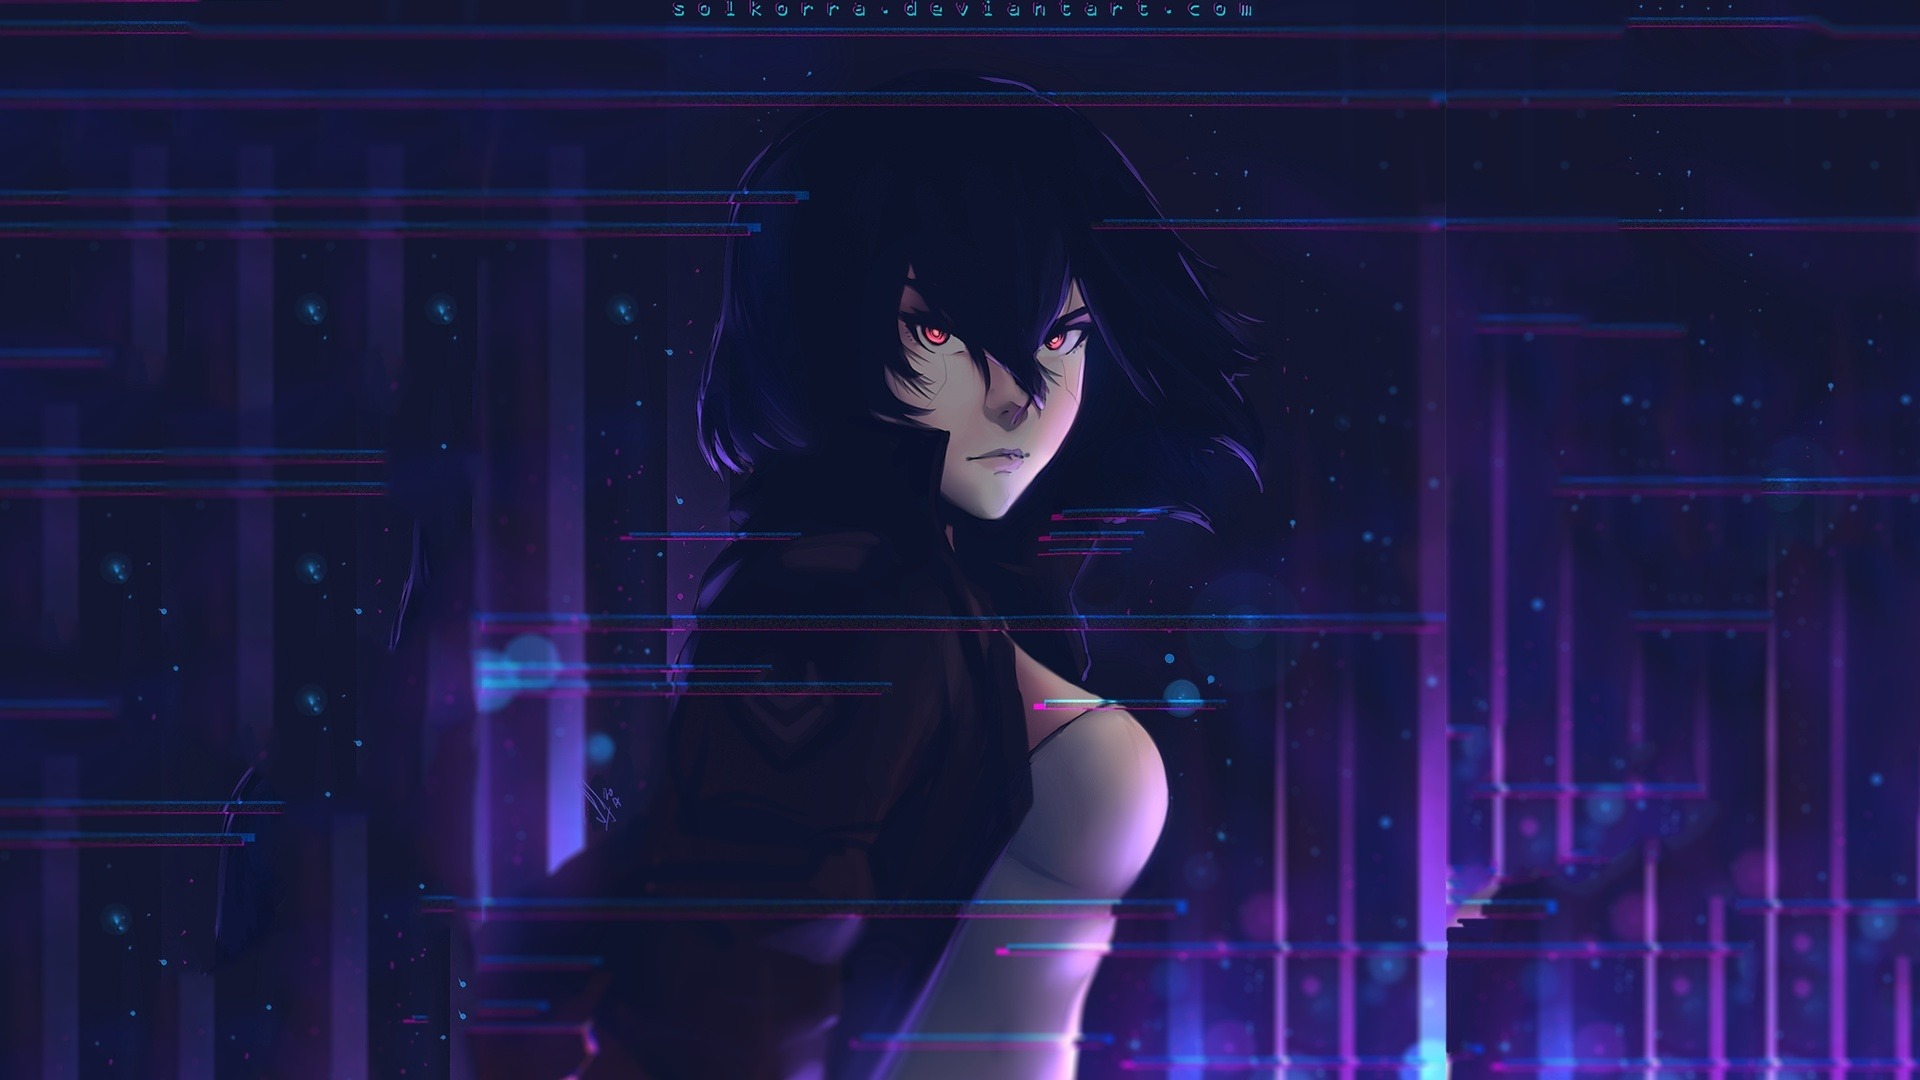 Download 1920x1080 Wallpaper Ghost In The Shell Motoko